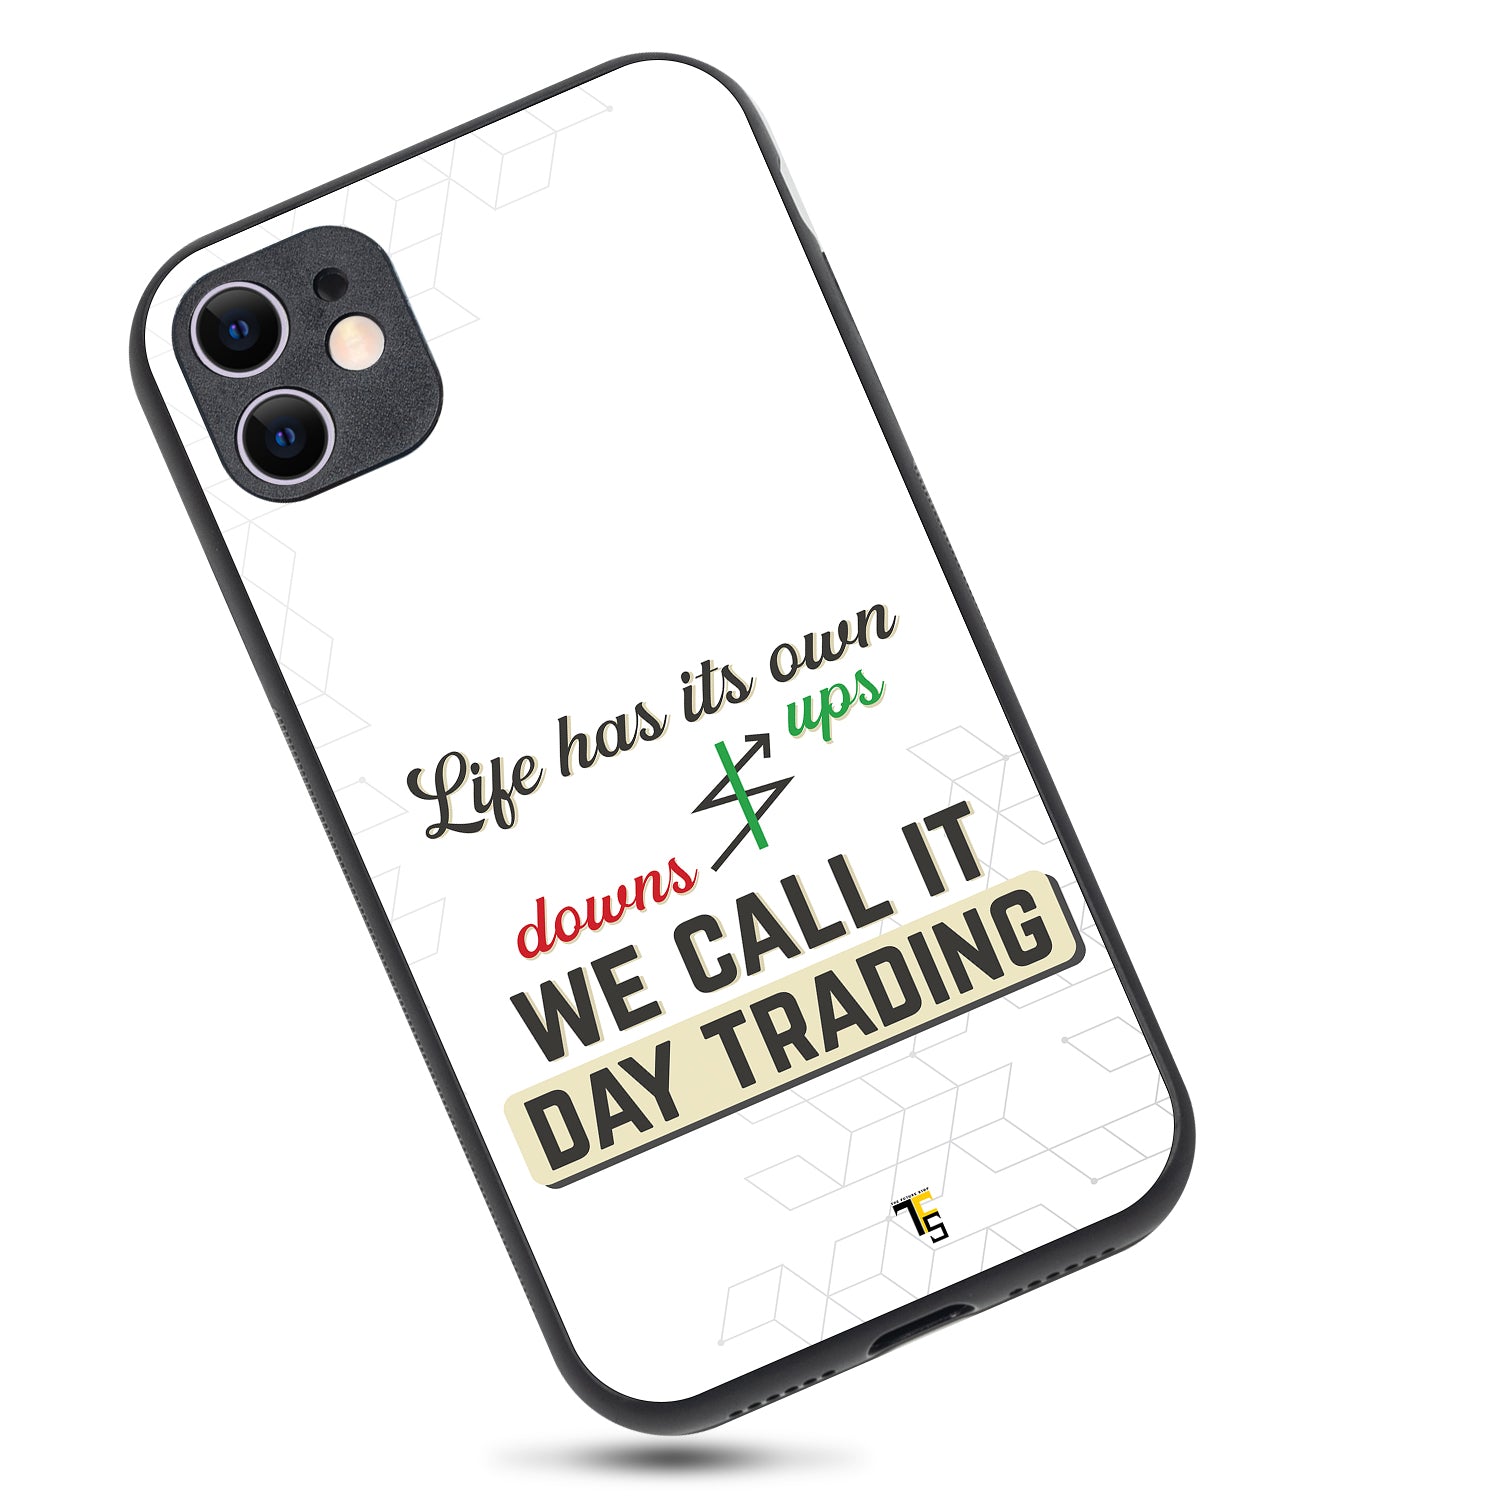 We Call It Trading iPhone 11 Case